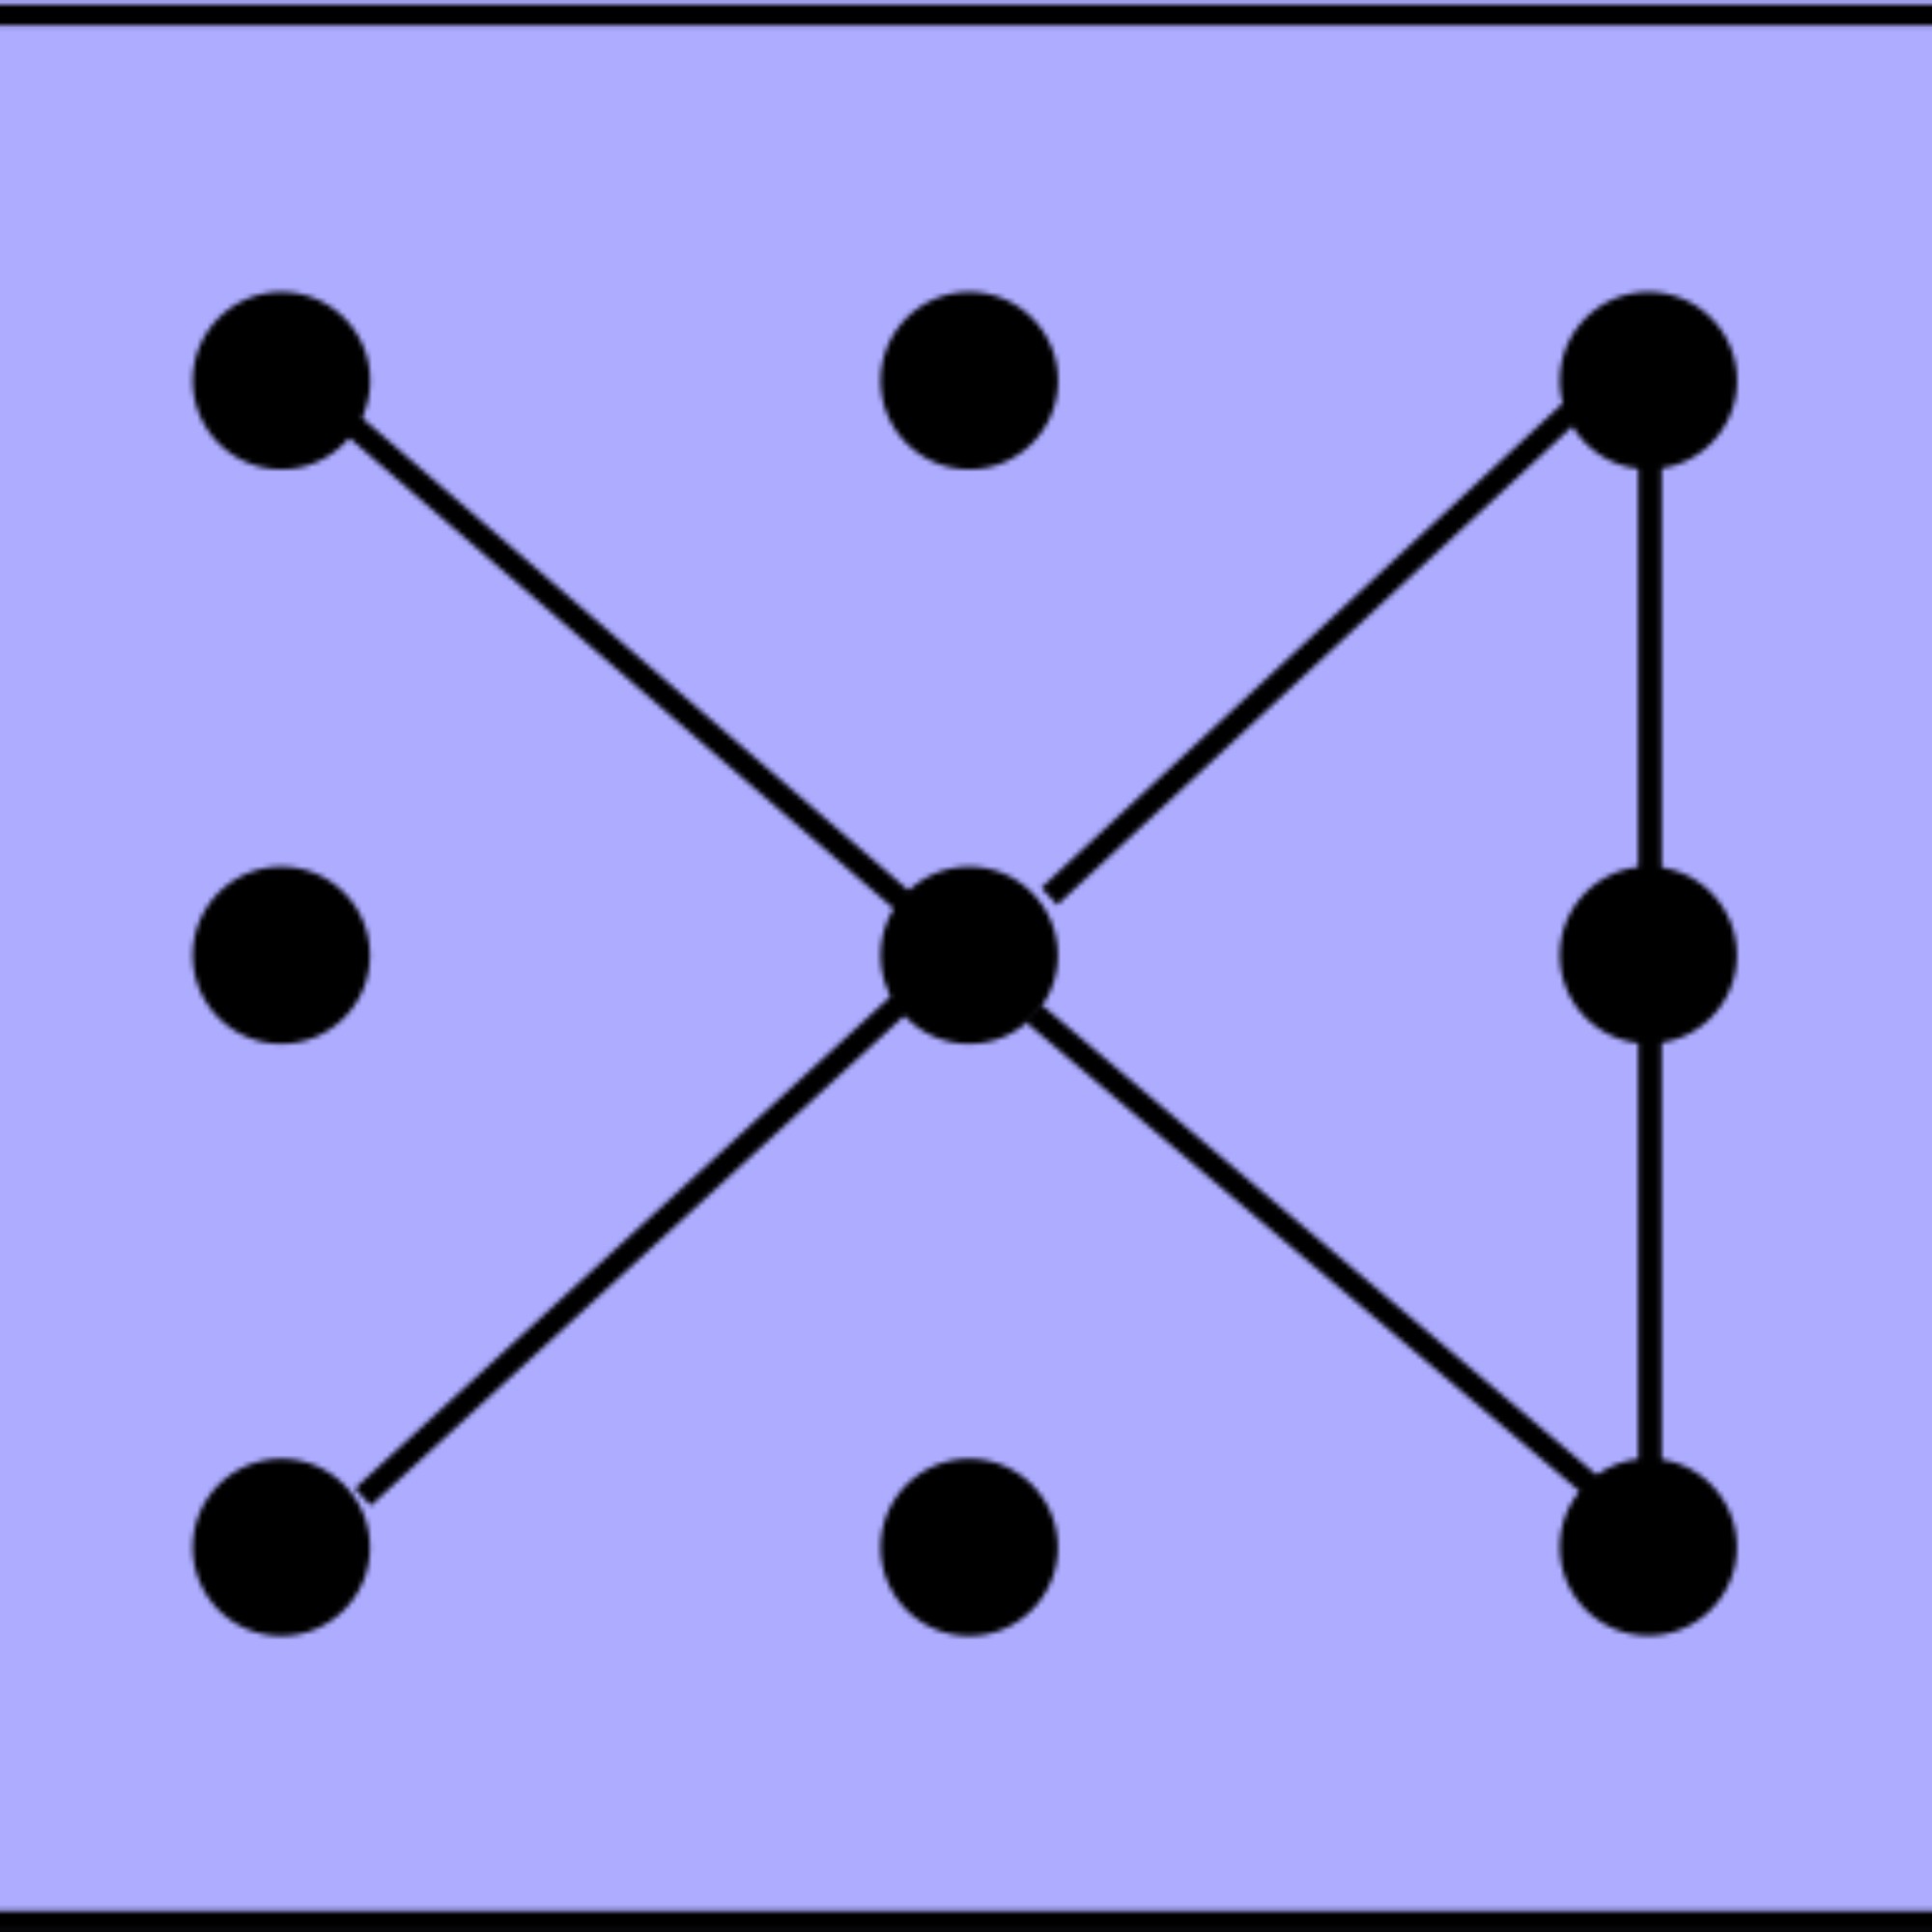 Configuration of dots